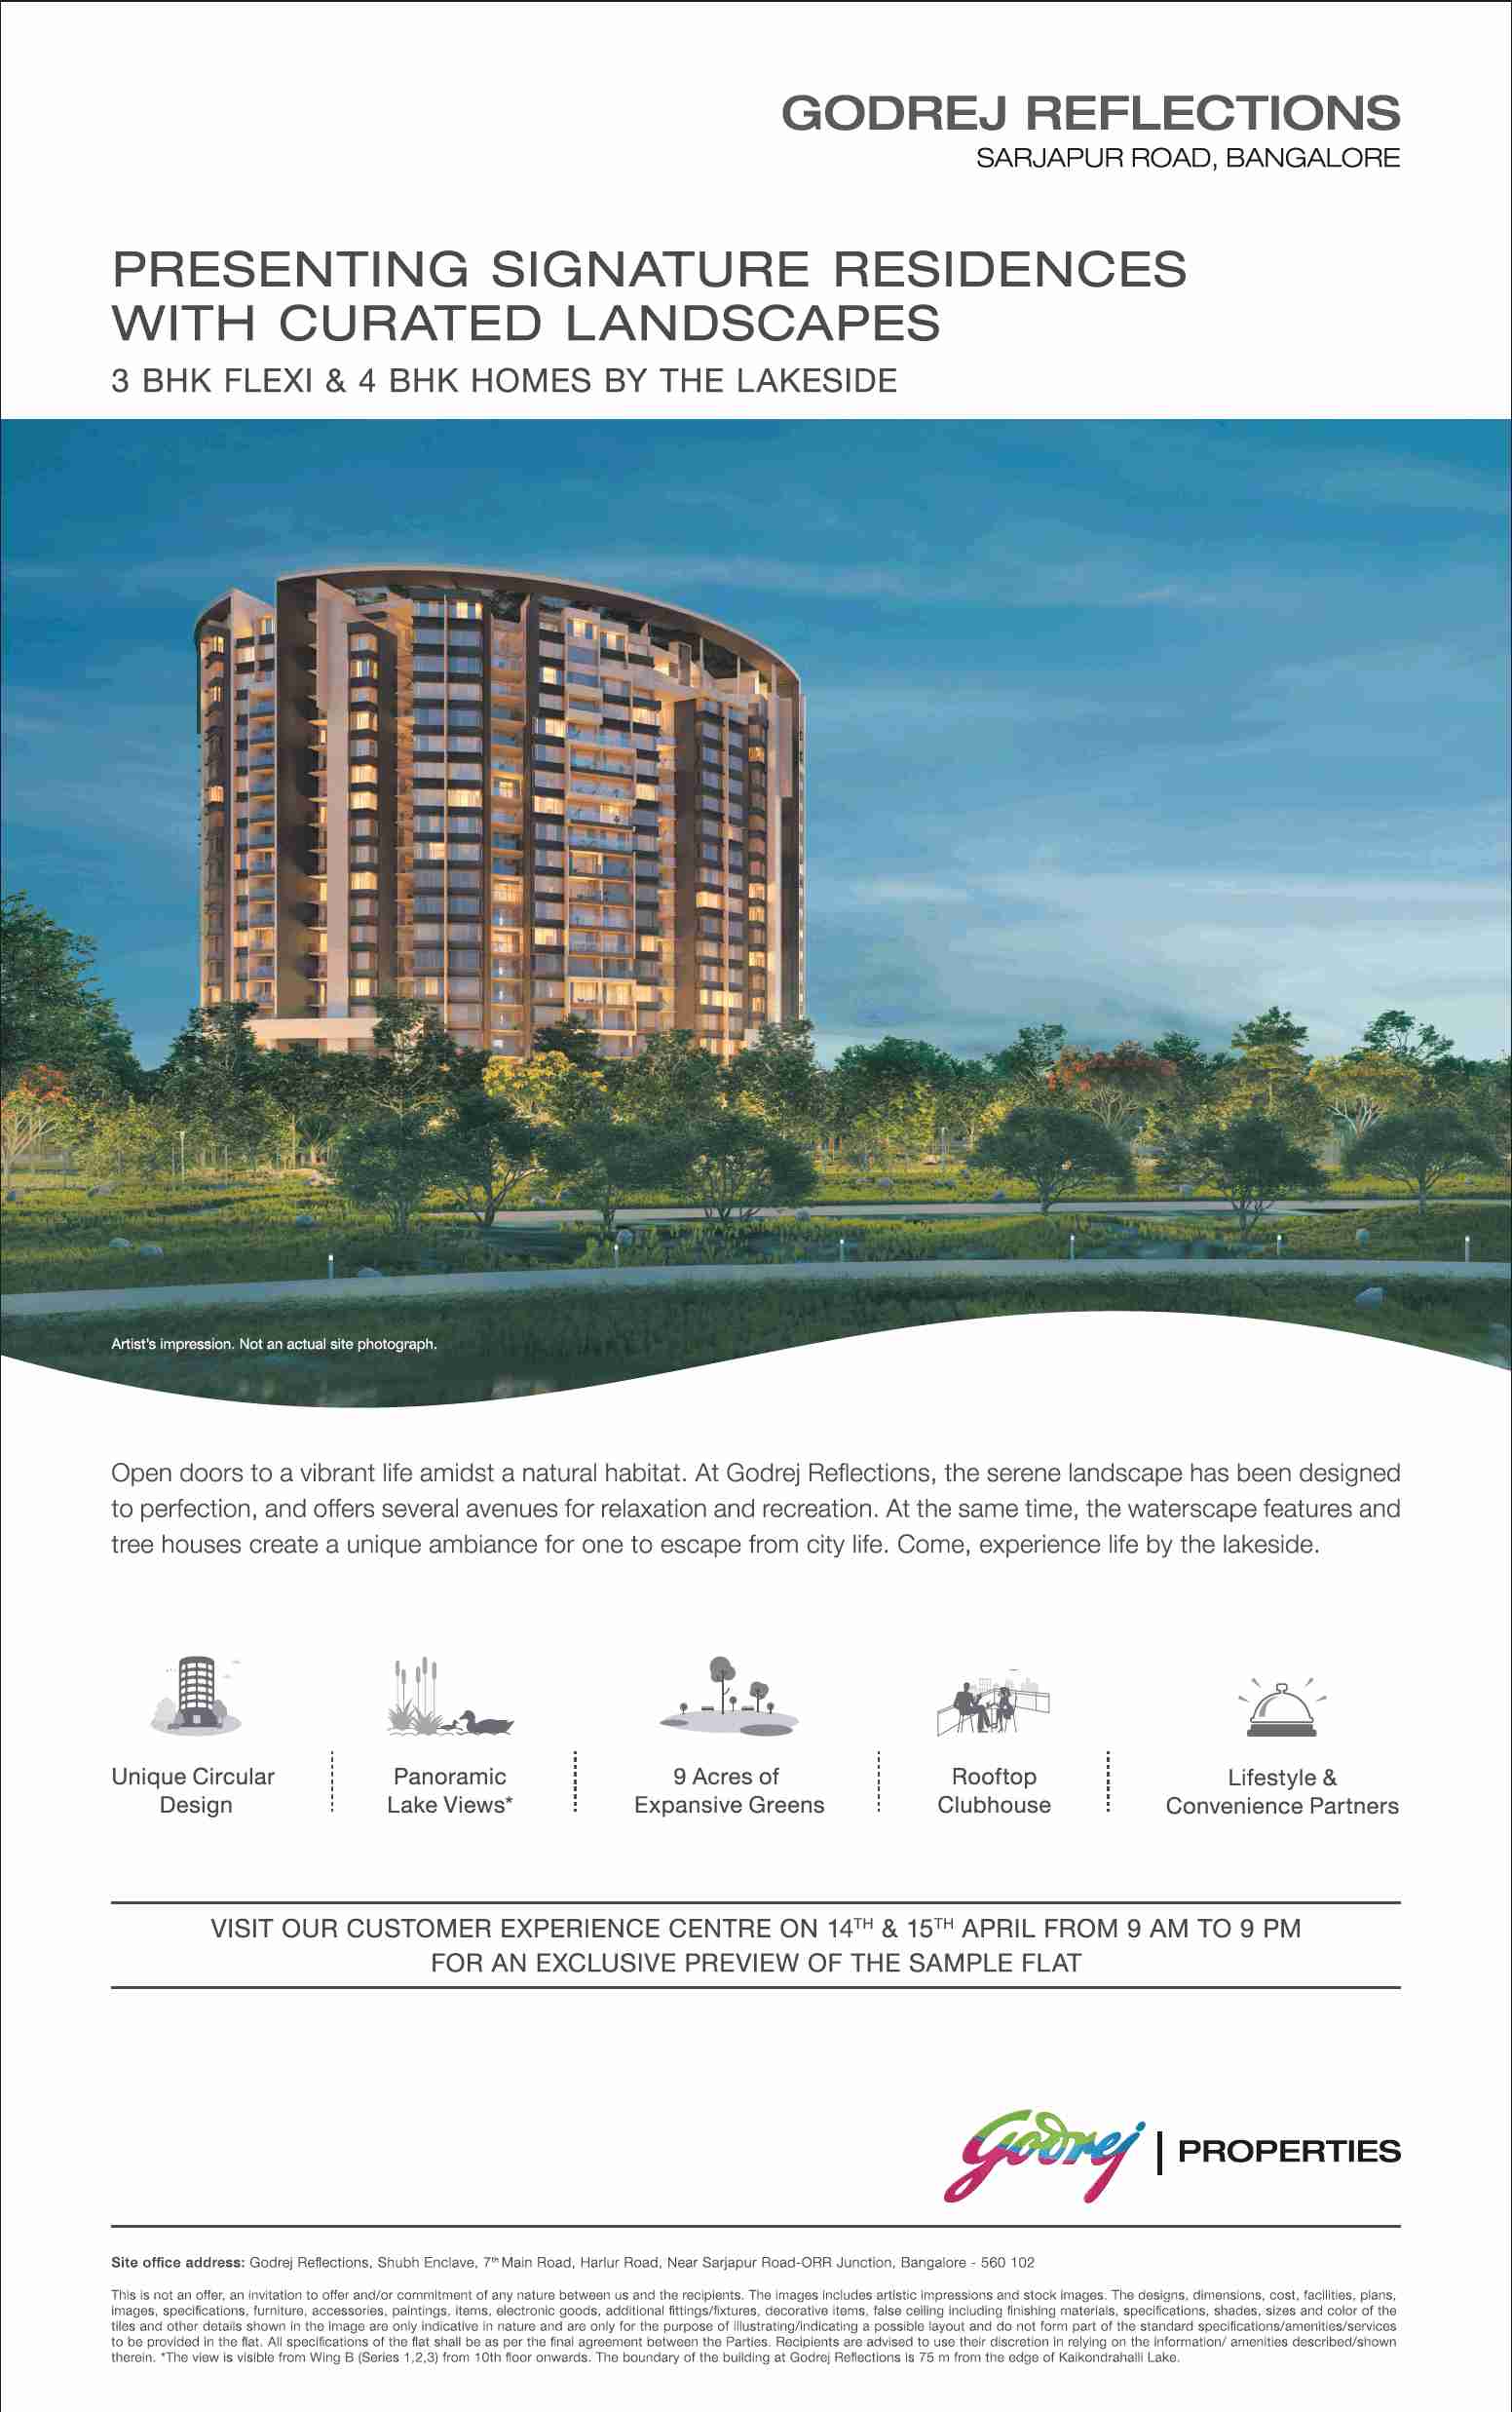 Live in signature residences with curated landscapes at Godrej Reflections in Bangalore Update